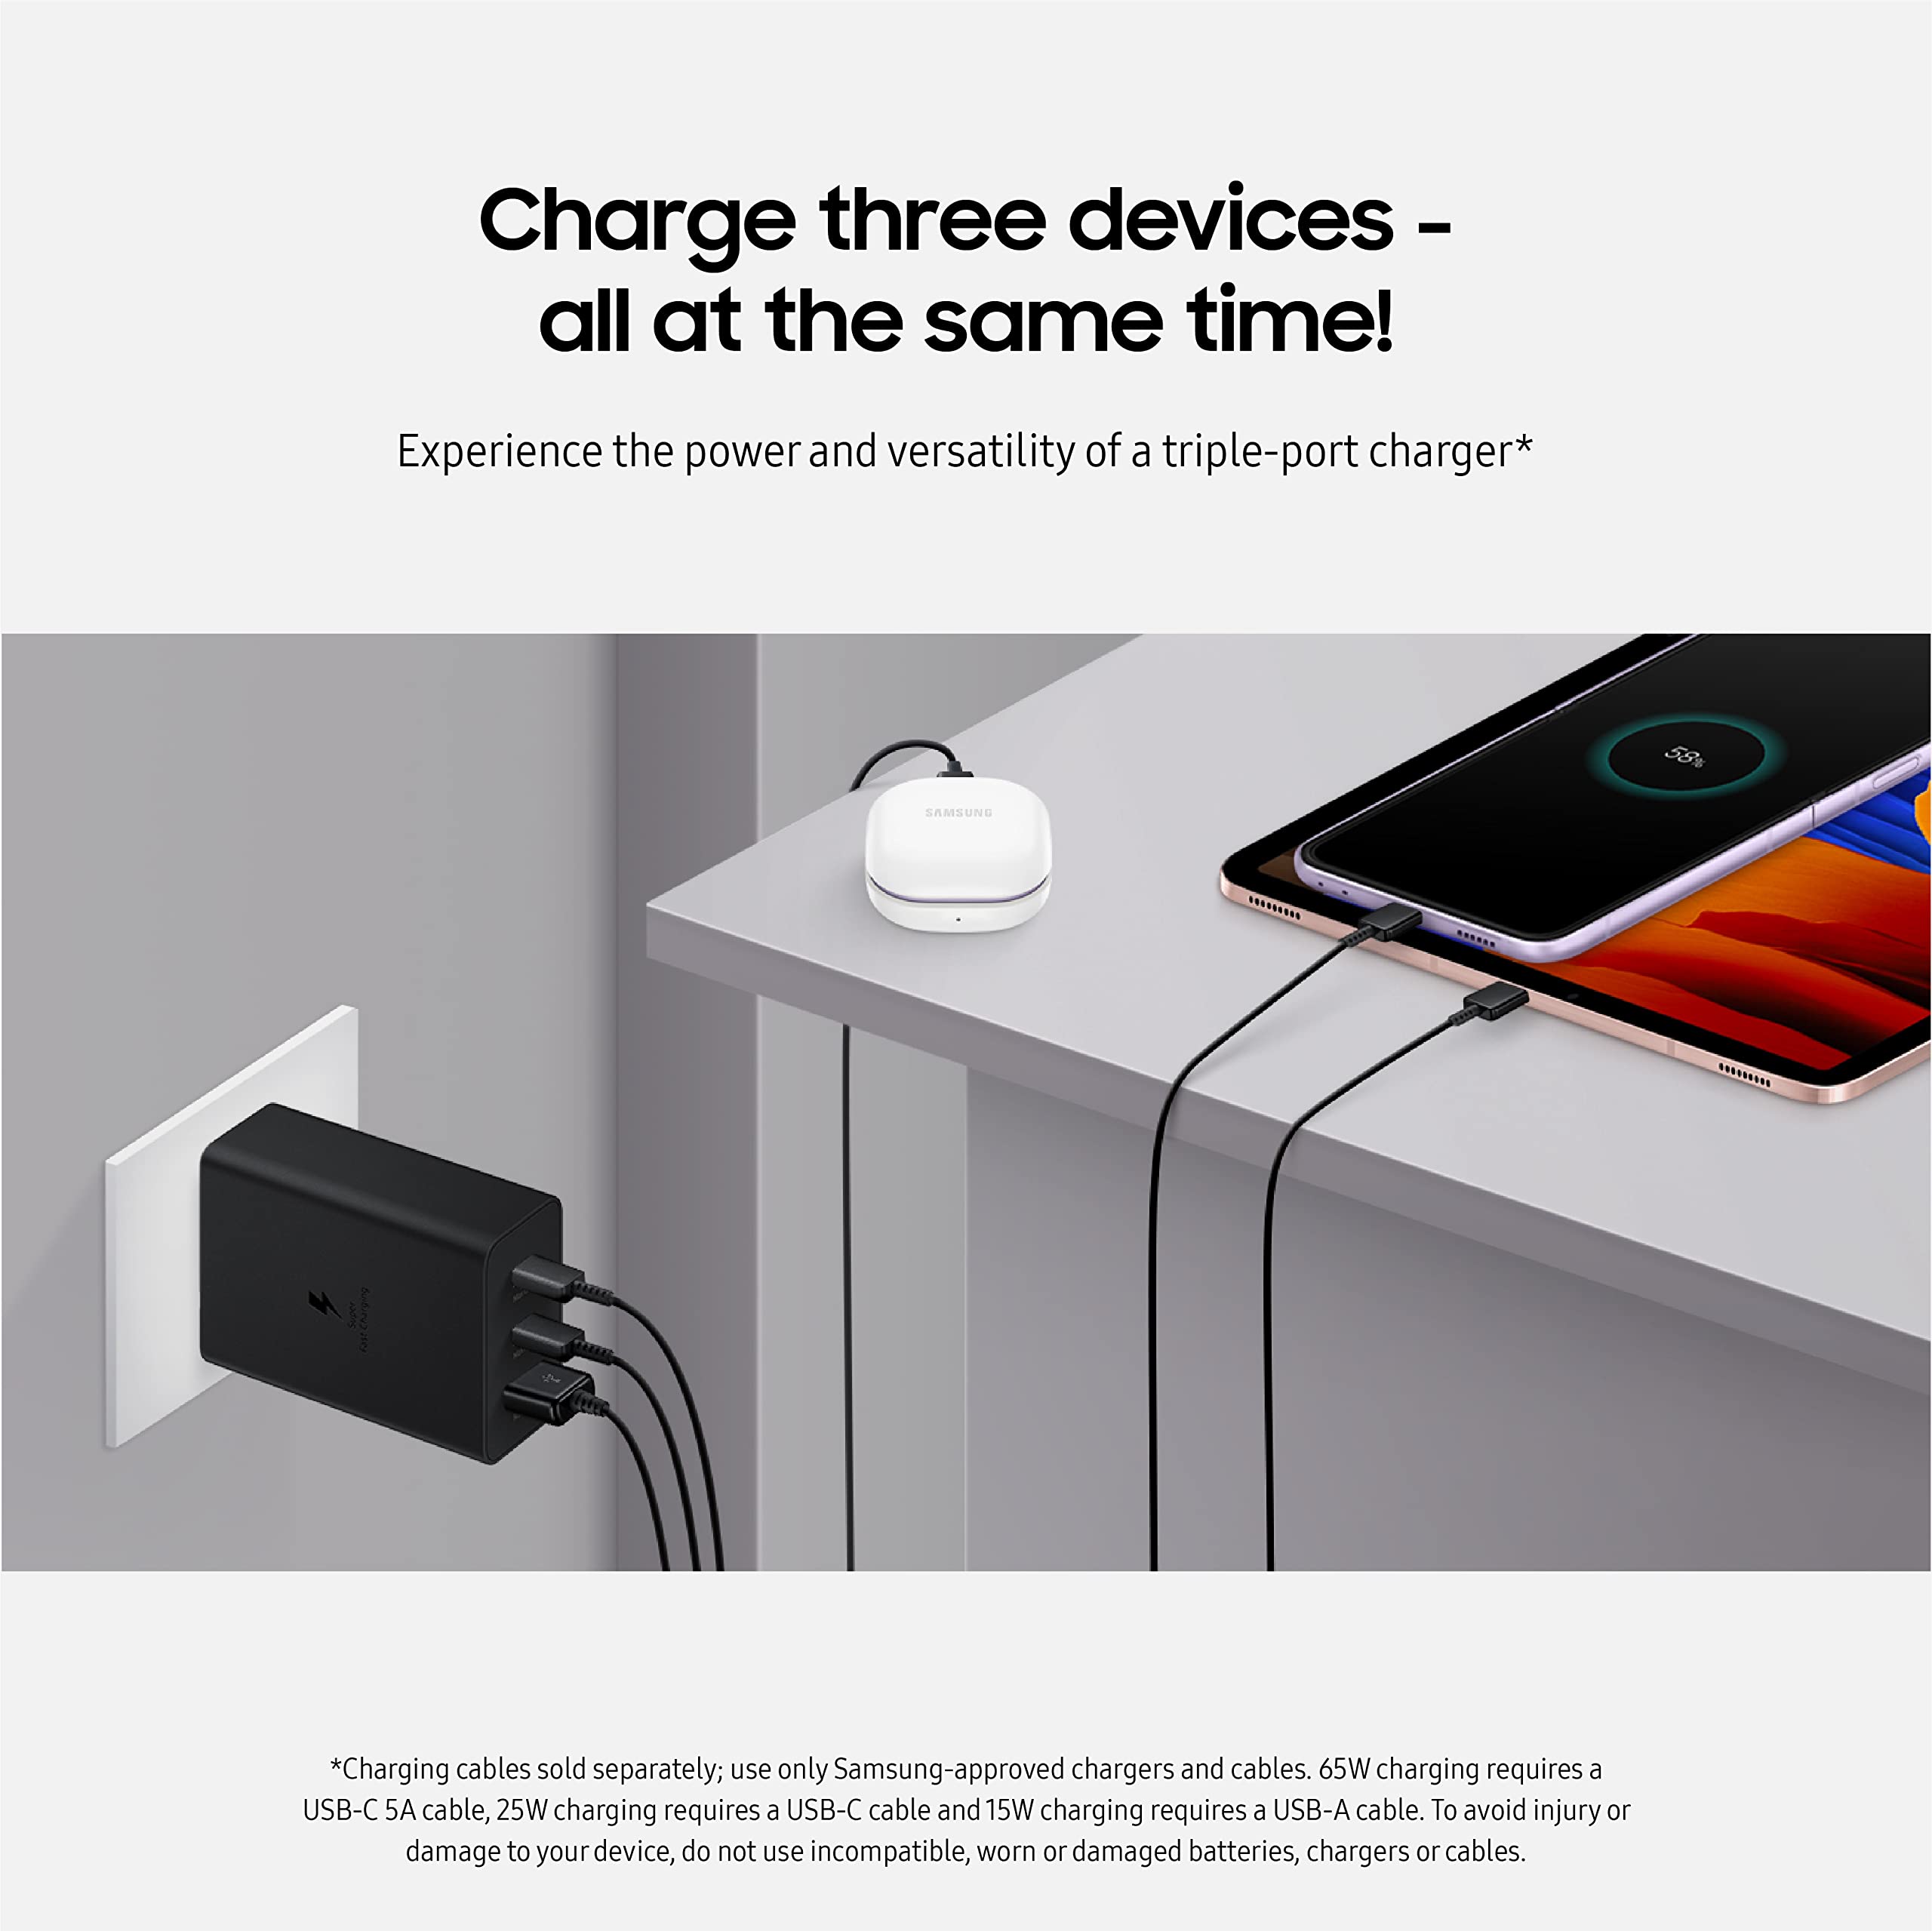 Samsung 65W 3-Port Super Fast Charging Wall Charger, 1x USB-C 65W, 1x USB-C 25W, 1x USB-A 25W, Max capacity 65W (Cable not included), Black, US version